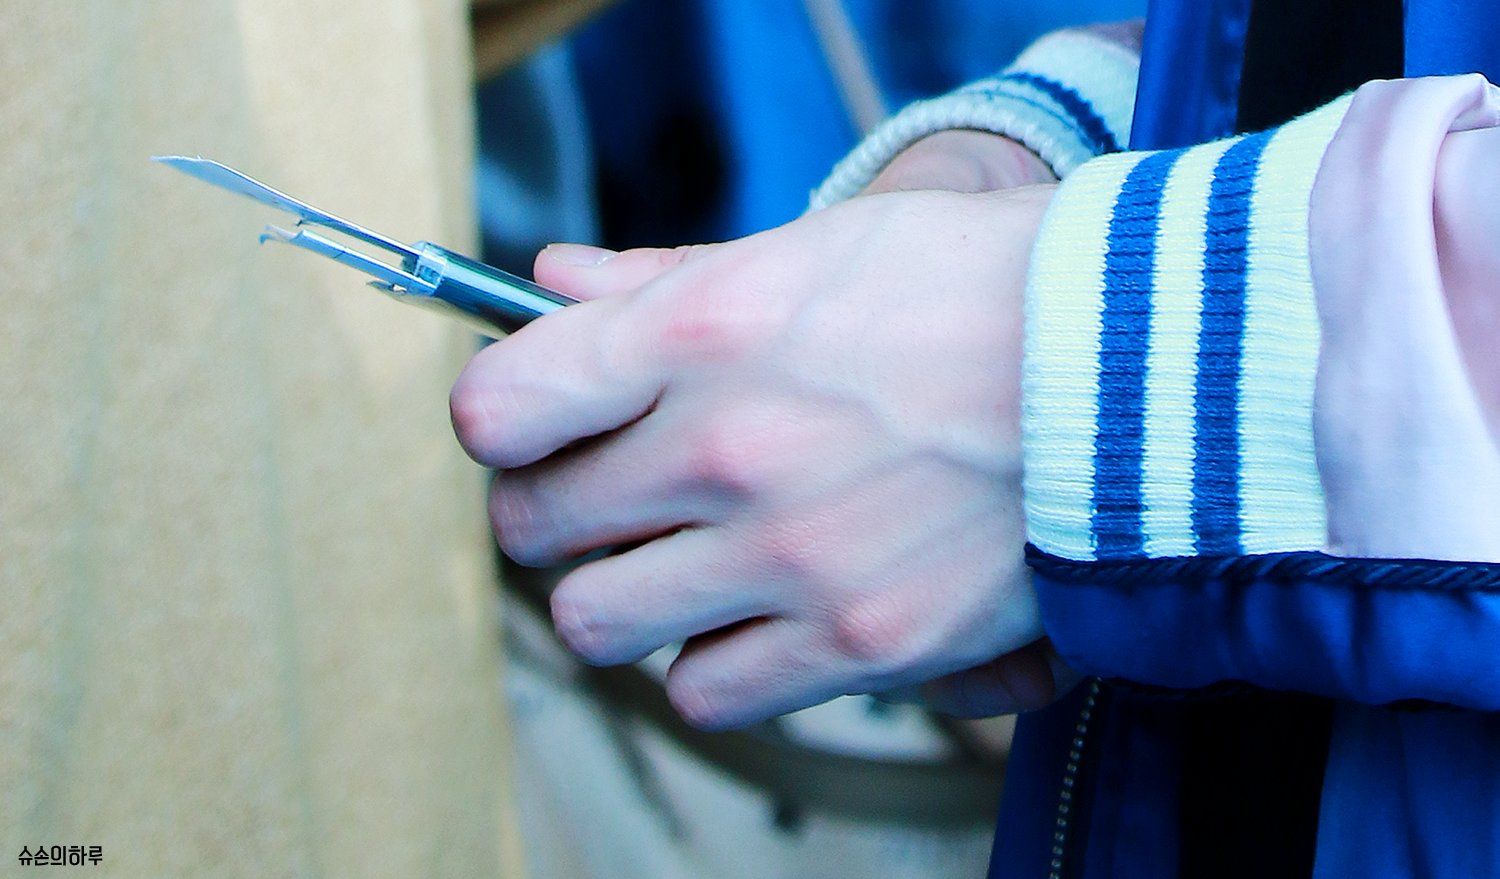 29 Photos Of BTS Suga’s Hands You Really Just Need To See - Koreaboo1500 x 879